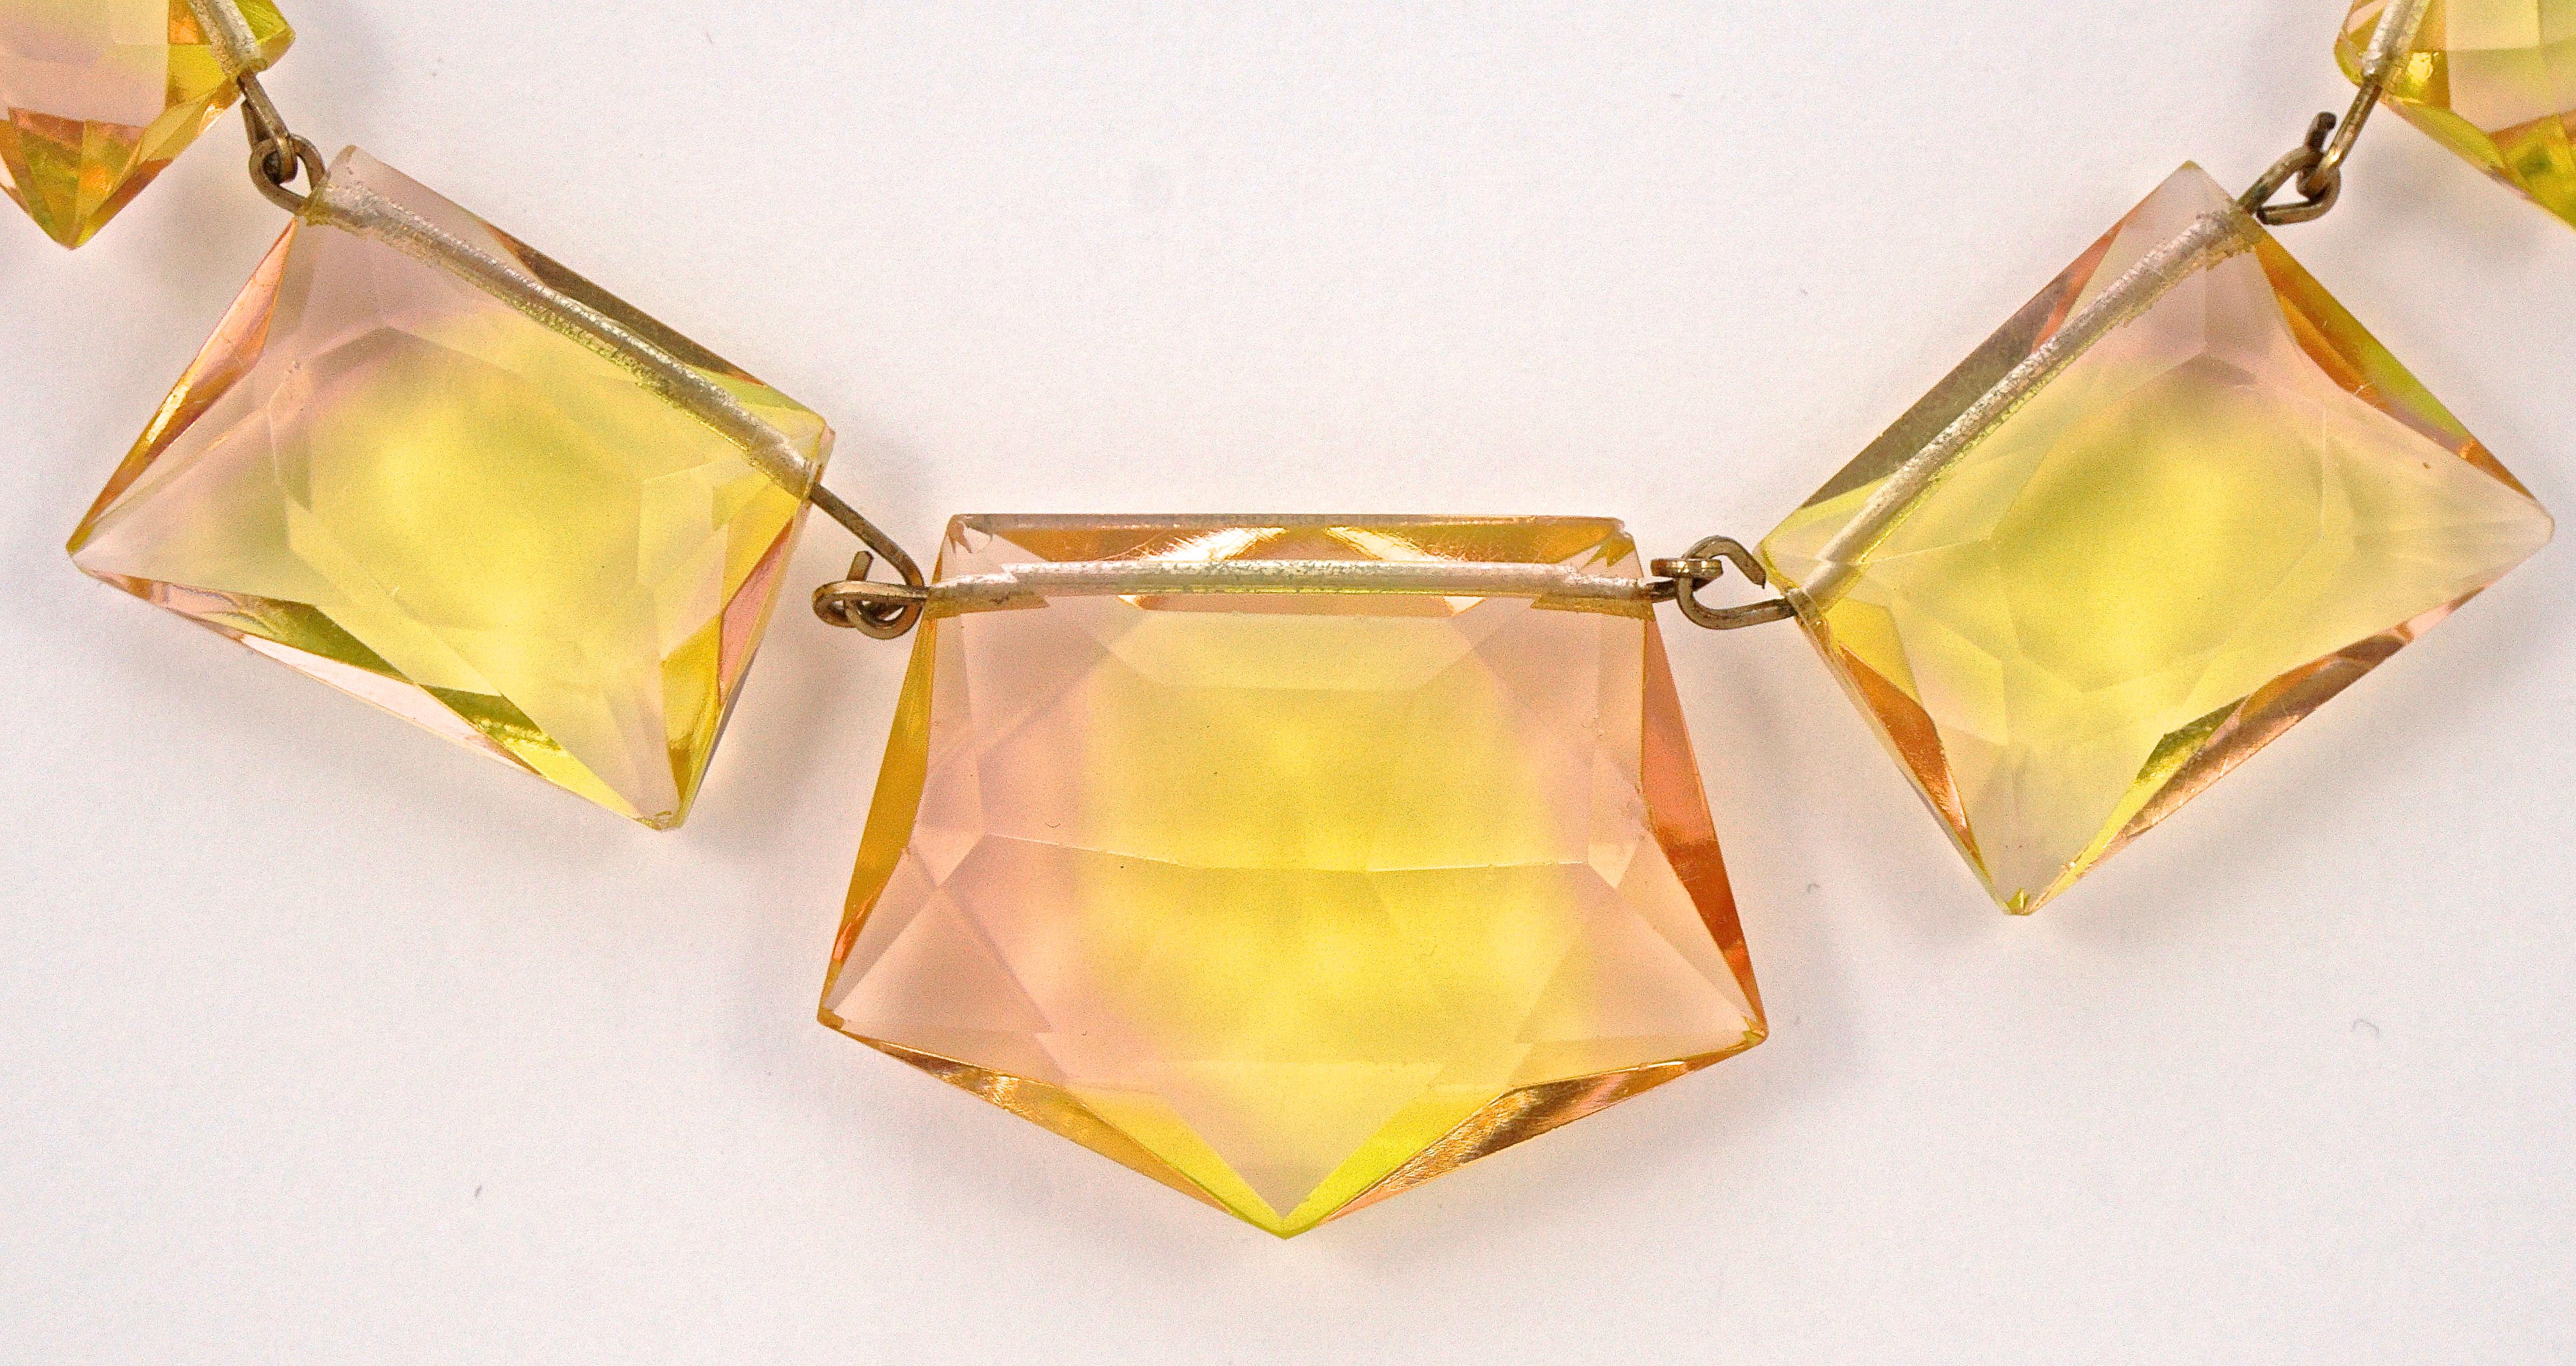 Art Deco gold tone necklace featuring fabulous shell pink and light yellow faceted uranium glass beads. Length 42cm / 16.53 inches, and the largest glass bead measures maximum width 3.5cm / 1.37 inches by 2.7cm / 1.06 inches. There is a chip to one